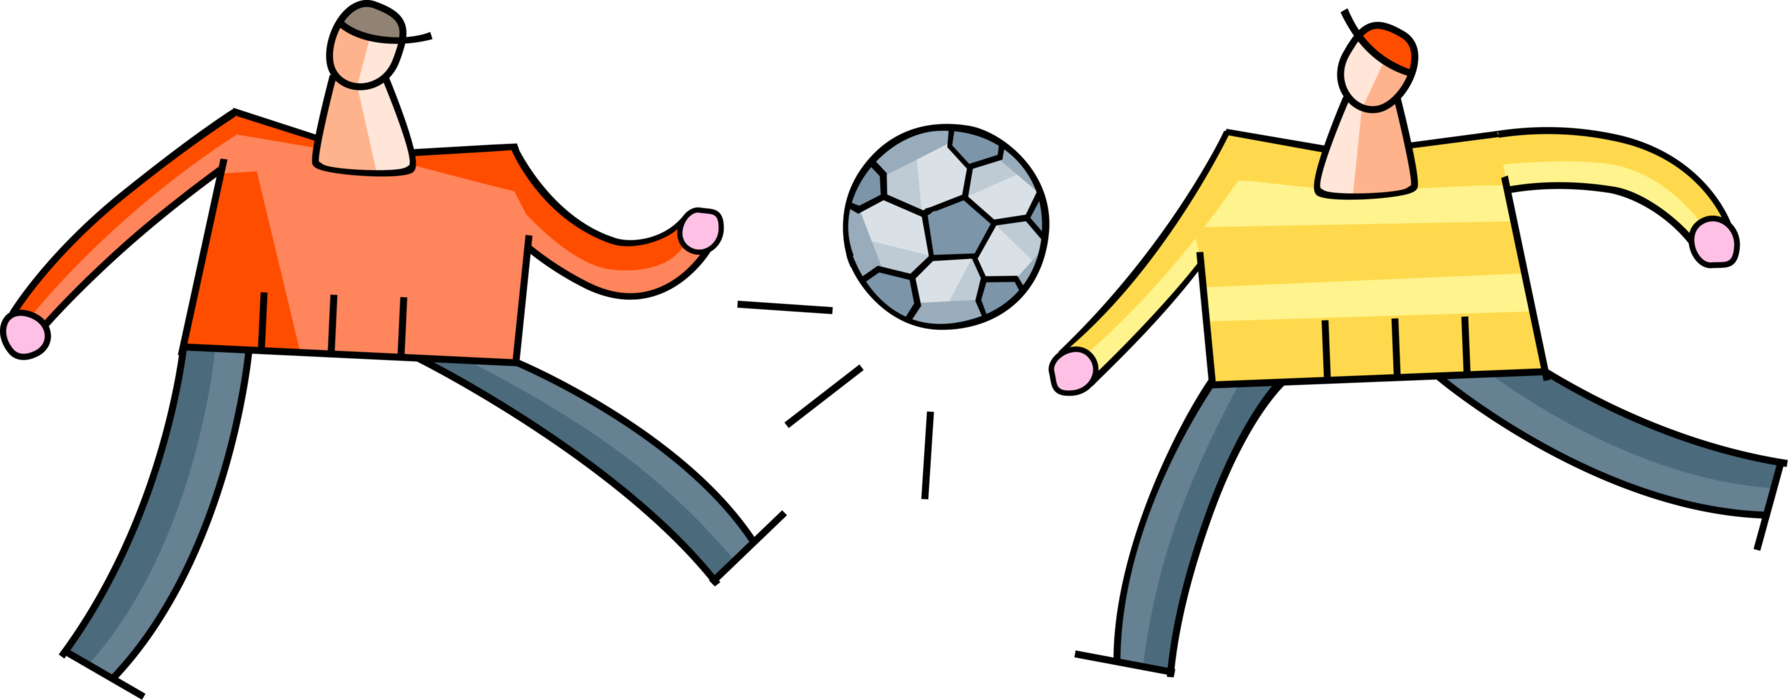 Vector Illustration of Sport of Soccer Football Player Kick Ball During Game on Field Pitch